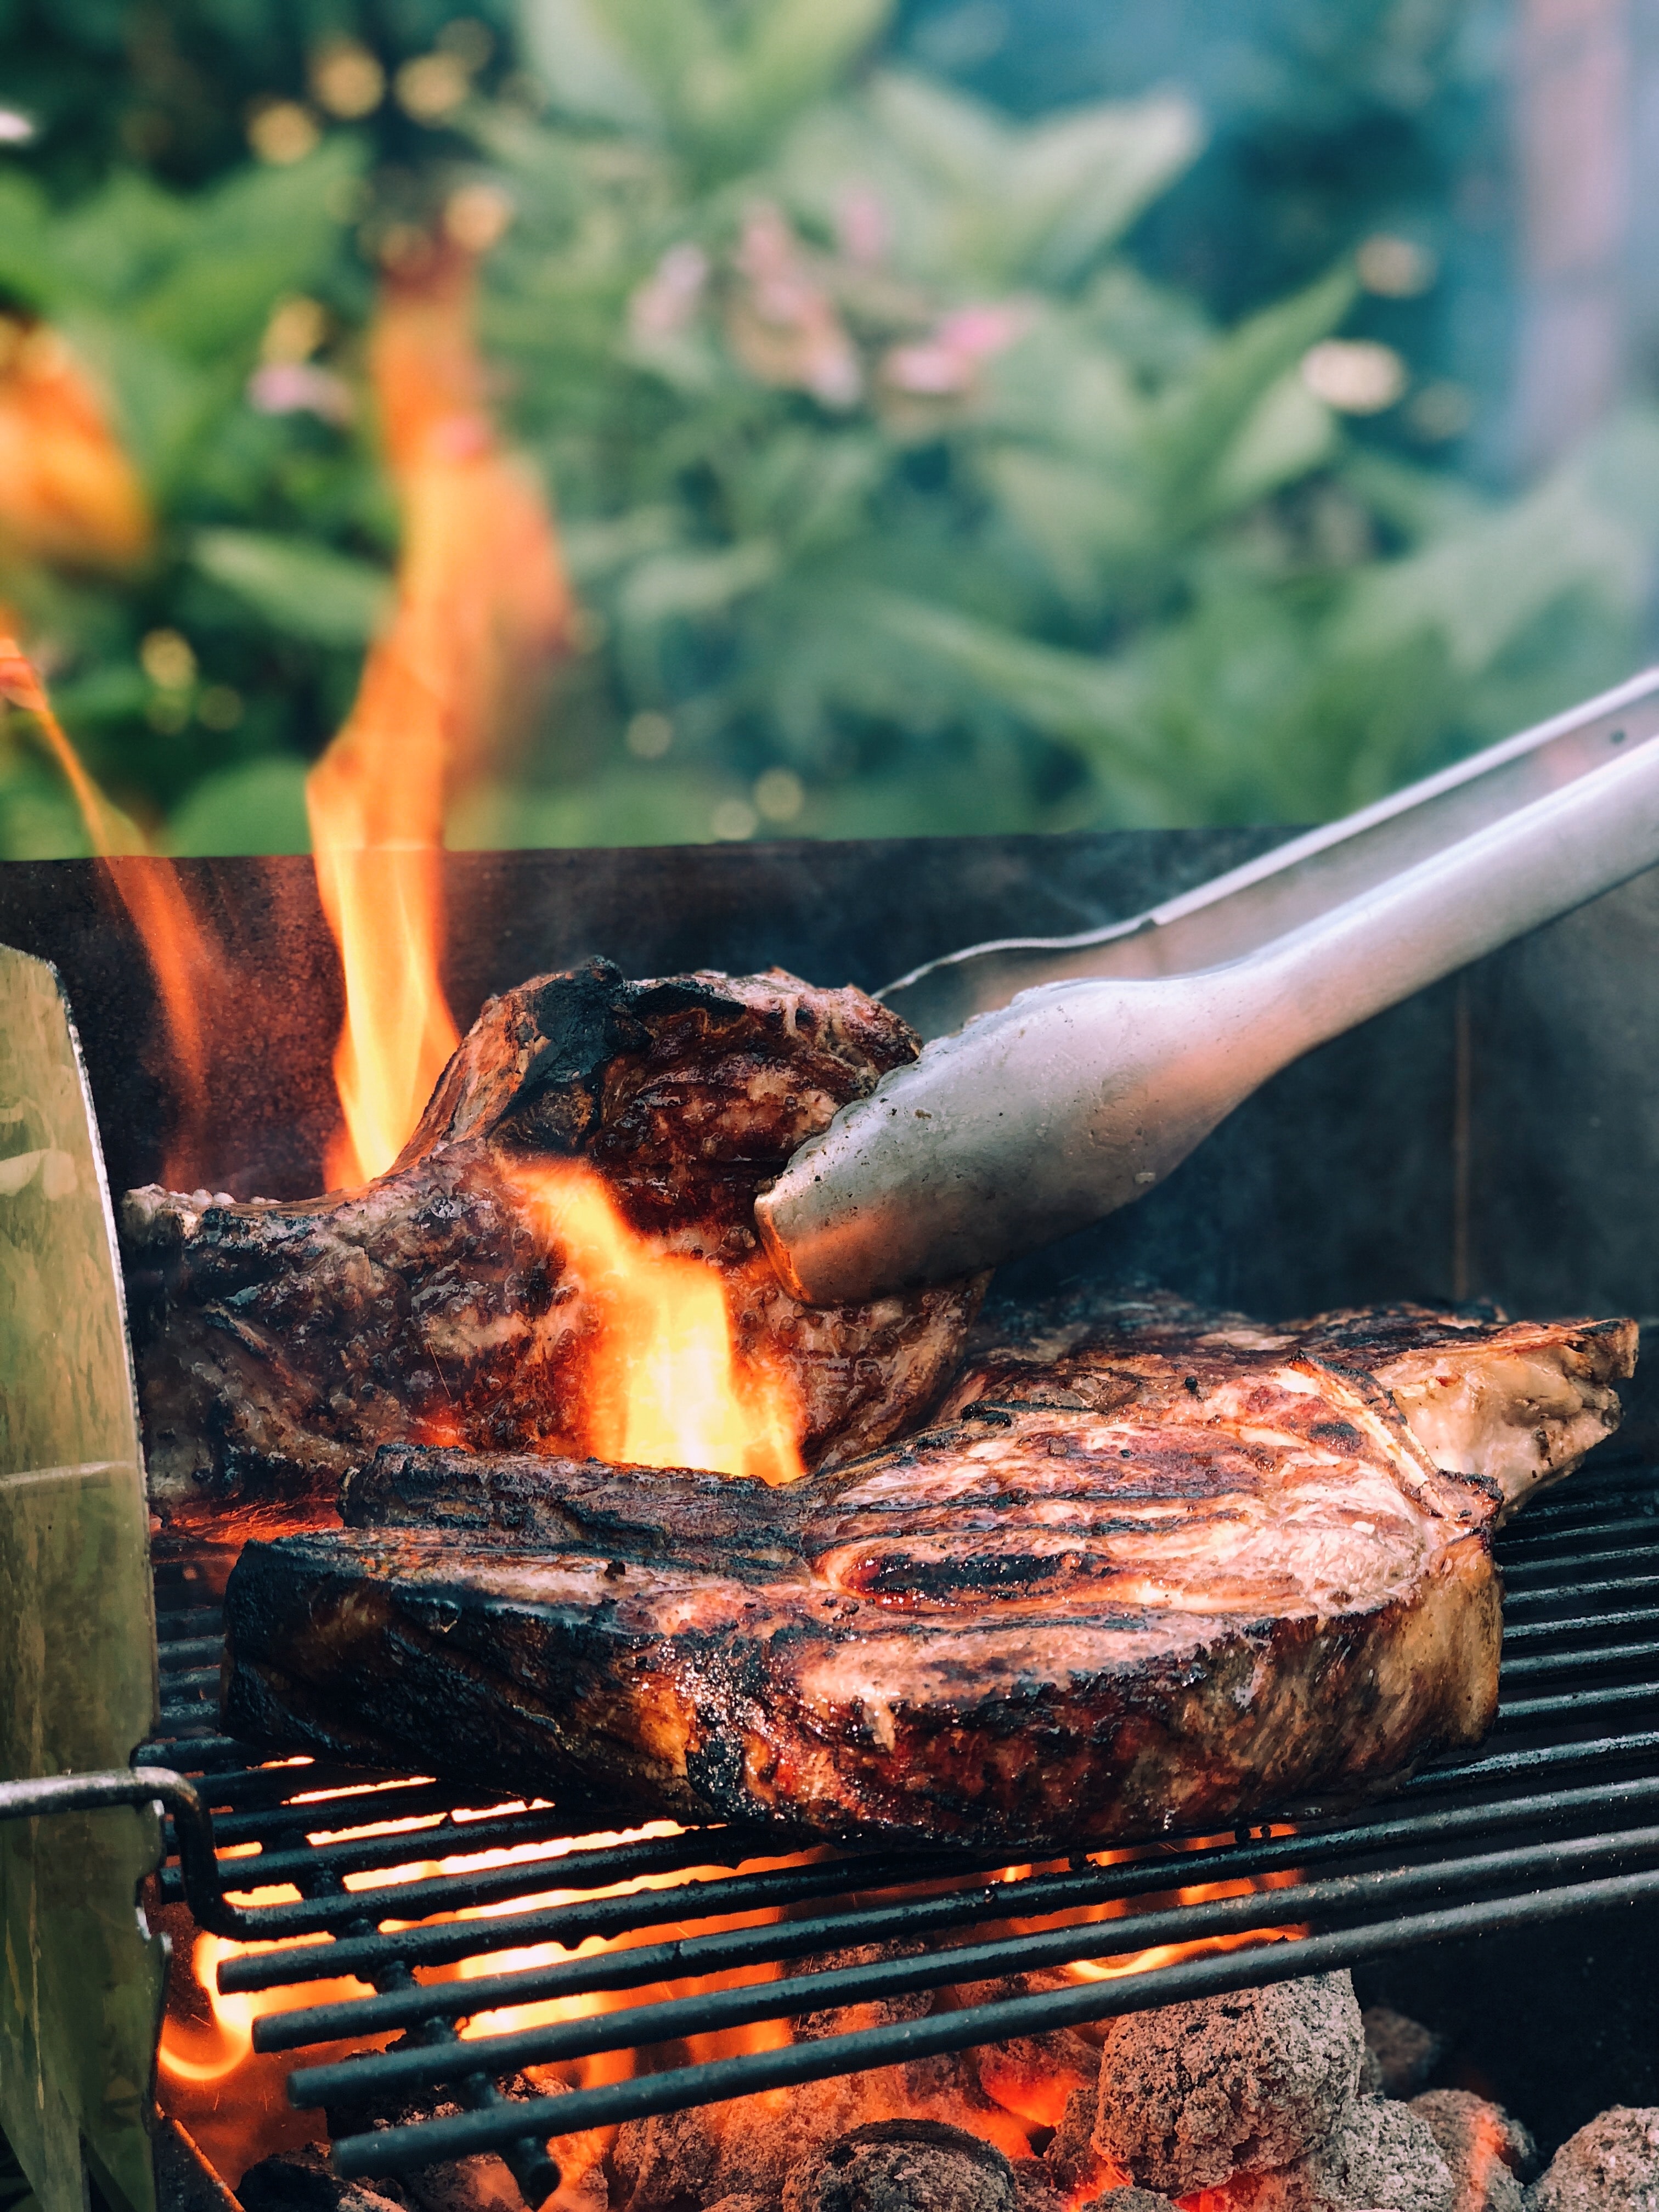 Accessories for the Ultimate Grilling Setup #grilling #BBQ #outdoorliving